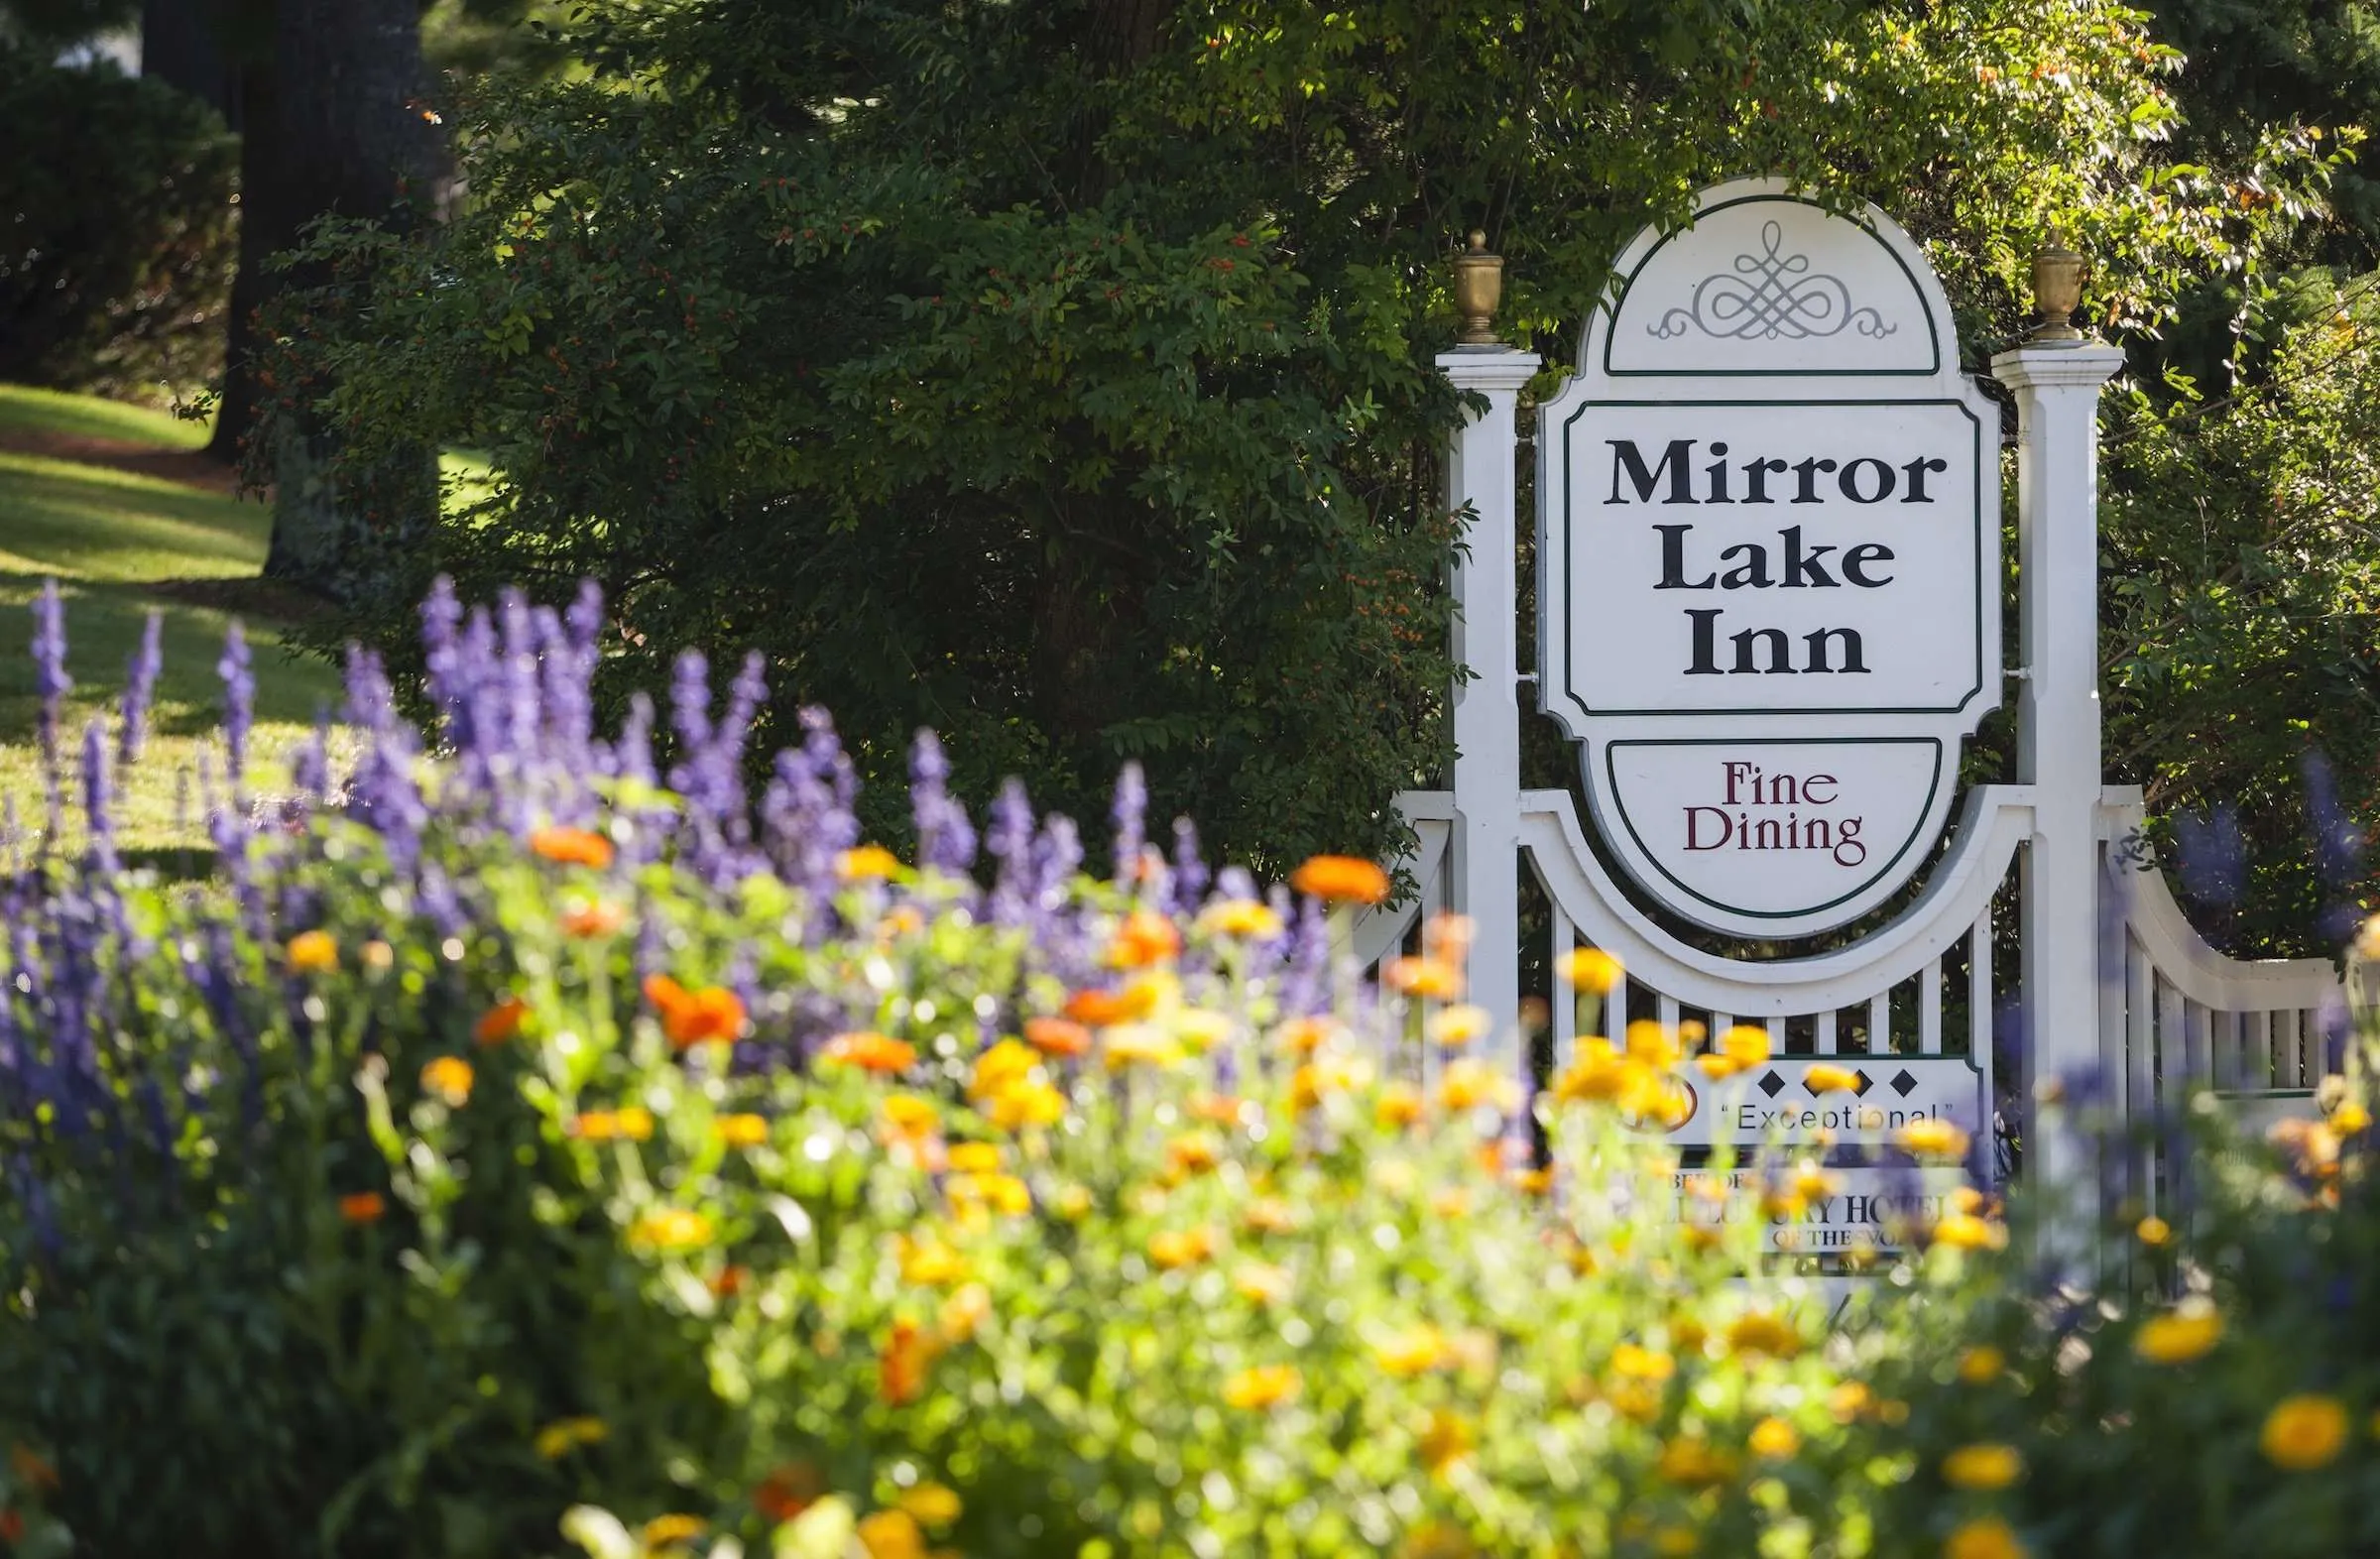 The Mirror Lake Inn signage with lavendar, orange and yellow flowers in the foreground